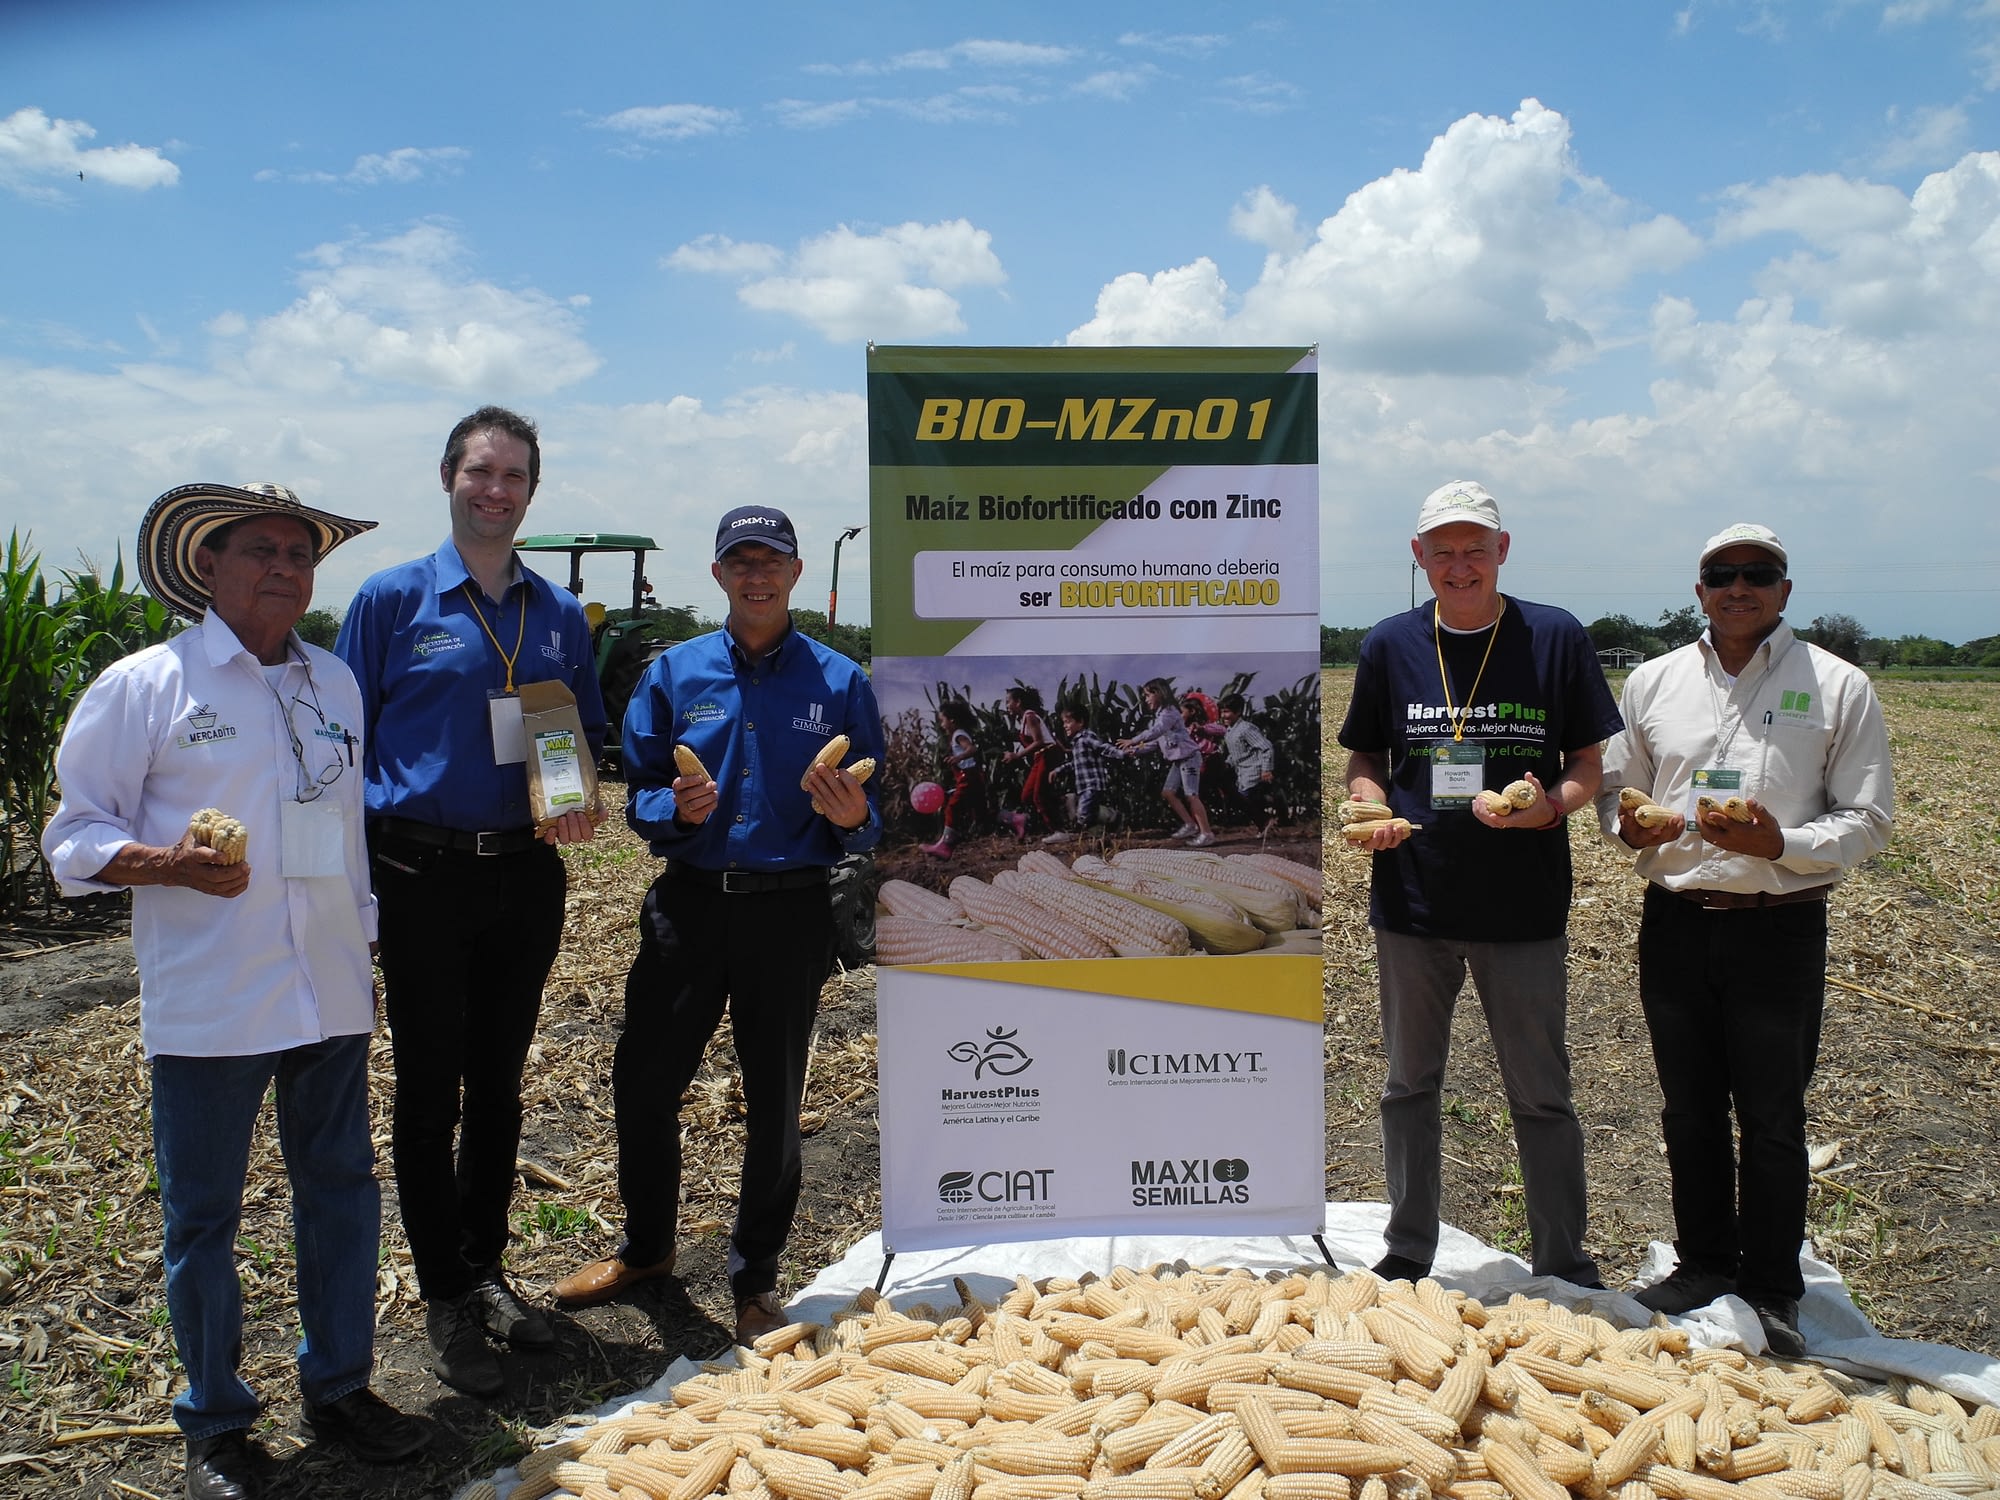 Left to right: Miguel Lengua, director general of Maxi Semillas S.A.S; Bram Govaerts, Latin America regional director at CIMMYT; Martin Kropff, CIMMYT director general; Howdy Bouis, interim HarvestPlus CEO; and Felix San Vicente, CIMMYT maize breeder; at the launch of new biofortified zinc maize. (Photo: Jennifer Johnson/CIMMYT)